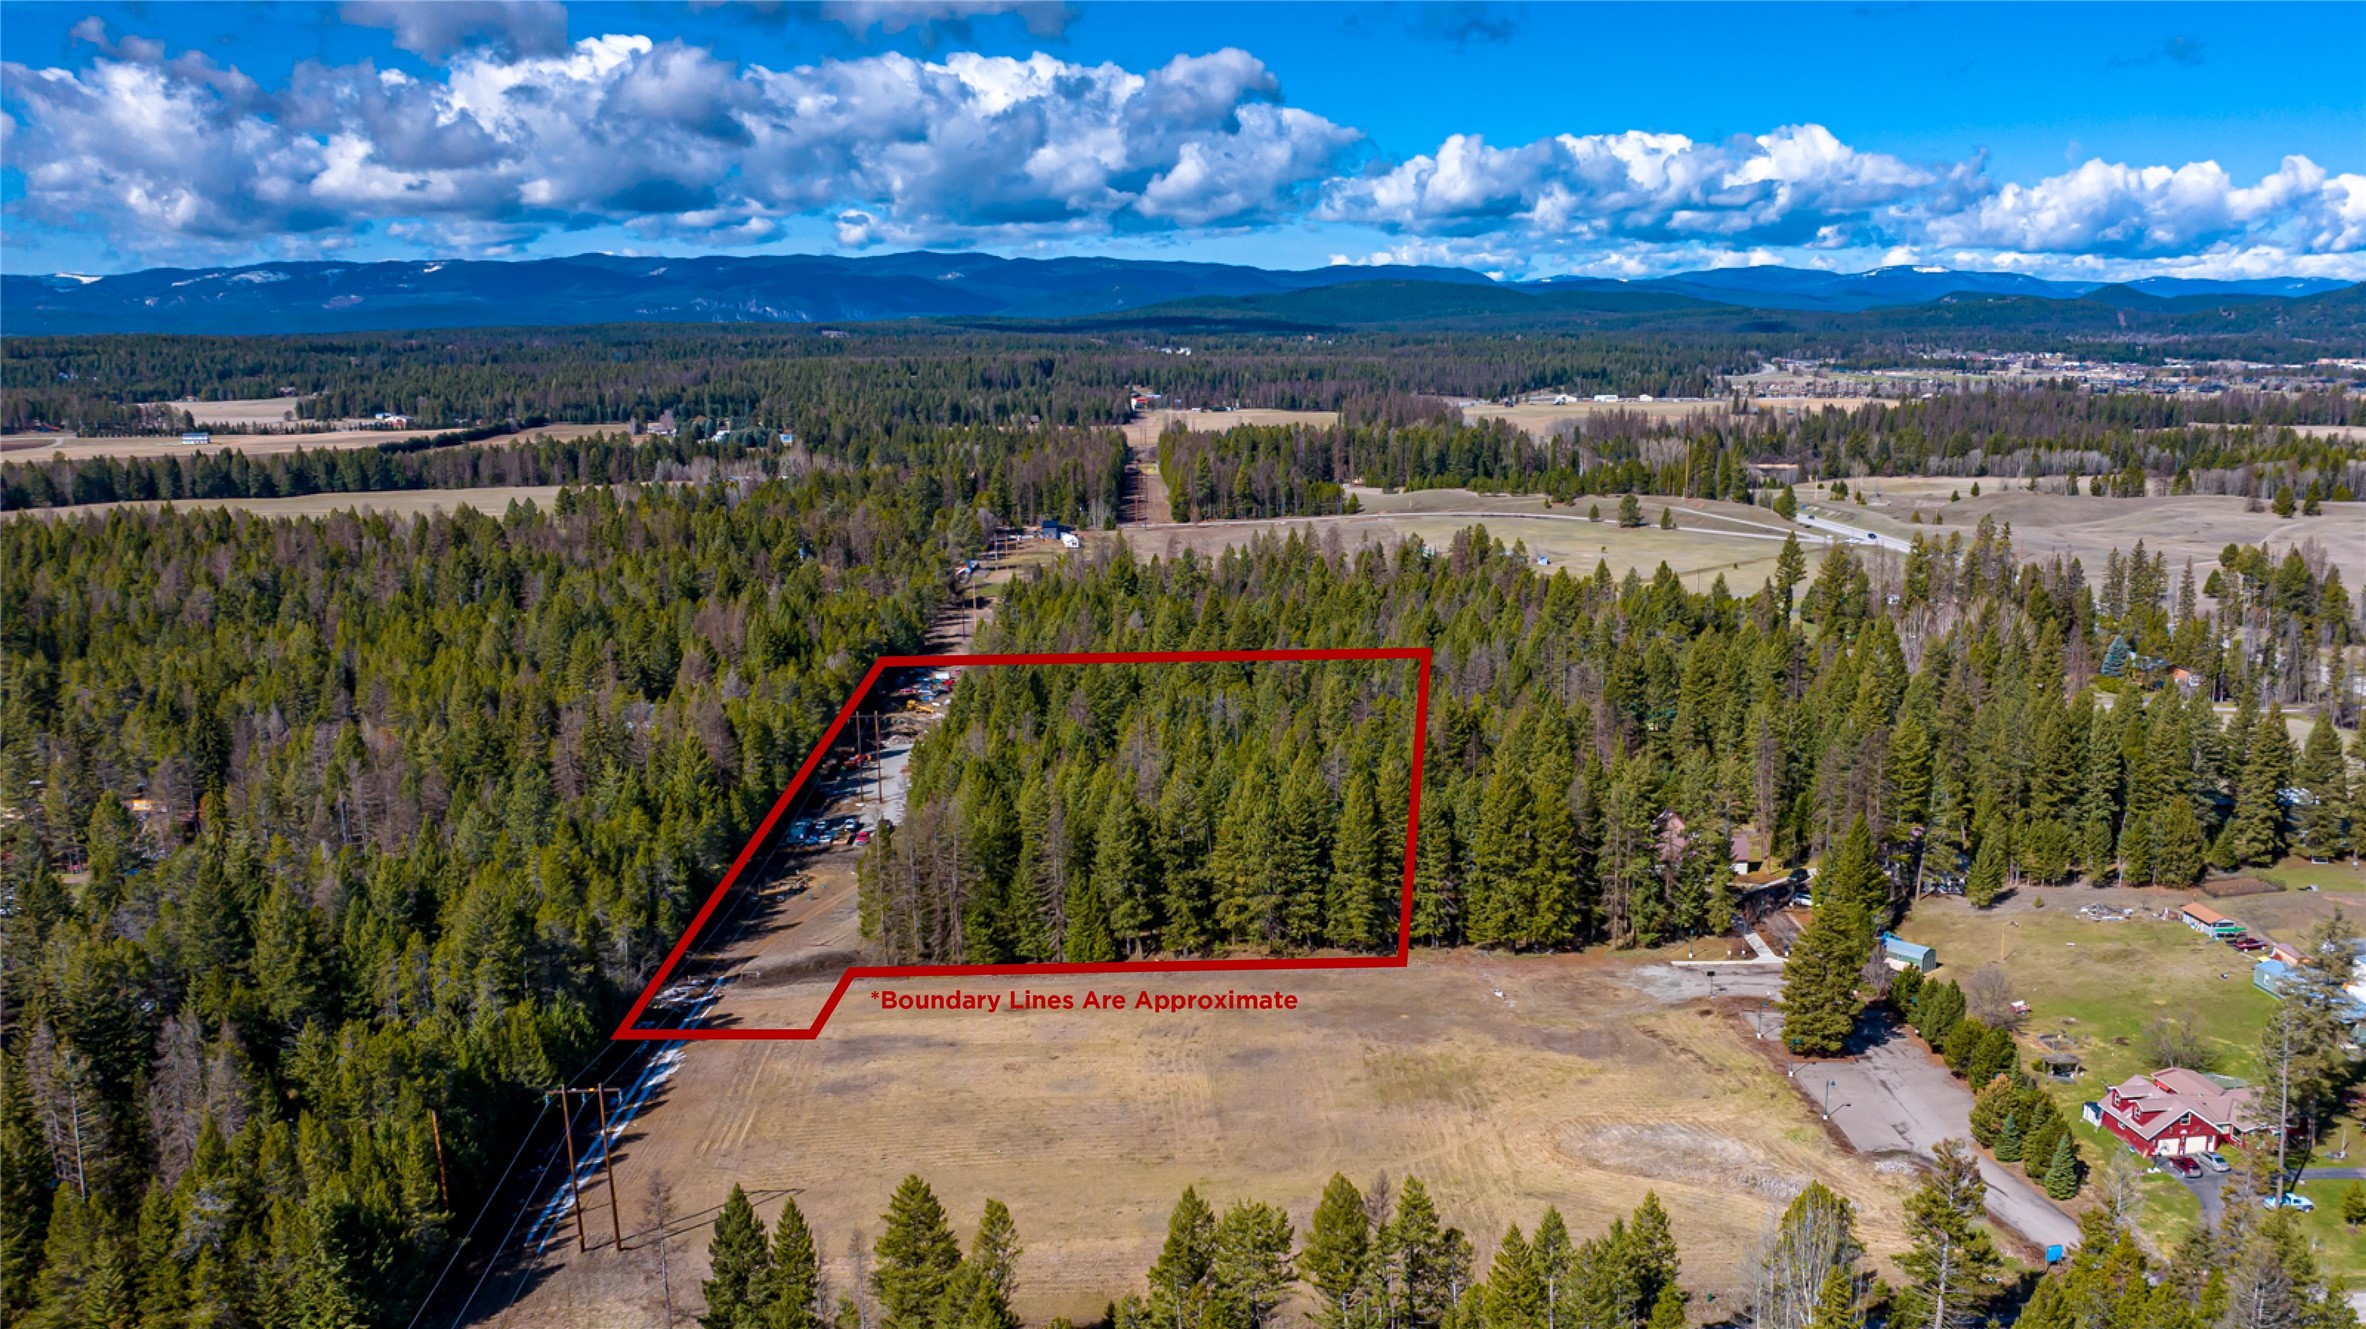 Embrace the tranquility of Montana living with this 2.5-acre forested parcel. Conveniently situated between downtown Whitefish and downtown Columbia Falls, this property provides an escape while remaining close to amenities.
Enjoy rural living while being just a 25-minute drive from Glacier National Park. Whether you're seeking a quiet retreat or easy access to outdoor adventures, this property offers a blank canvas for your vision of home.
Property has Flathead County preliminary plat approval, and owner will complete all requirements for final plat approval prior to closing. Well and septic will be the responsibility of the buyer. Please call Bill Kahle @406-270-9467 or Sharon Kahle @406-270-9468 or your real estate professional for more information.